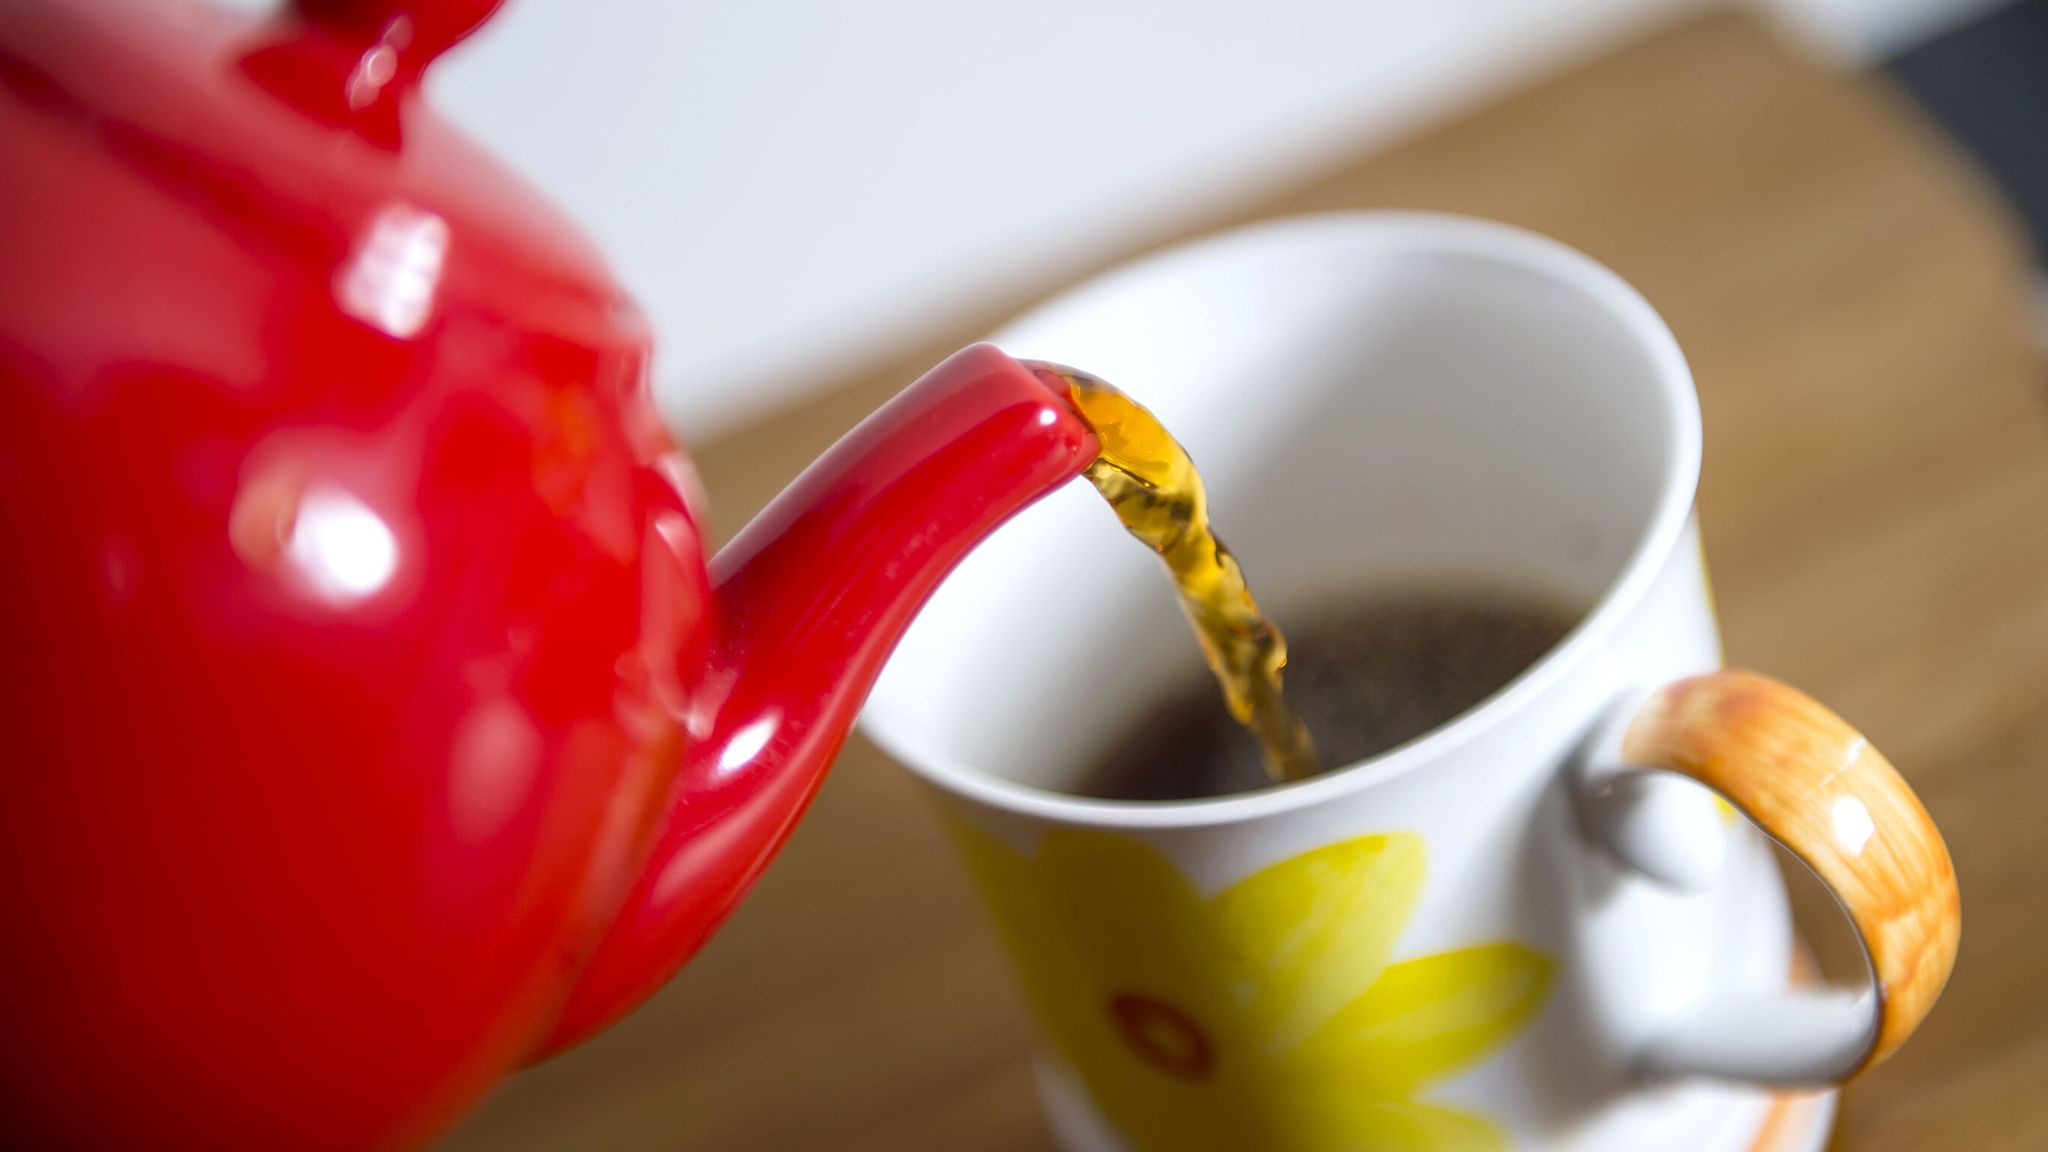 Tea drinkers more likely to live longer: Study